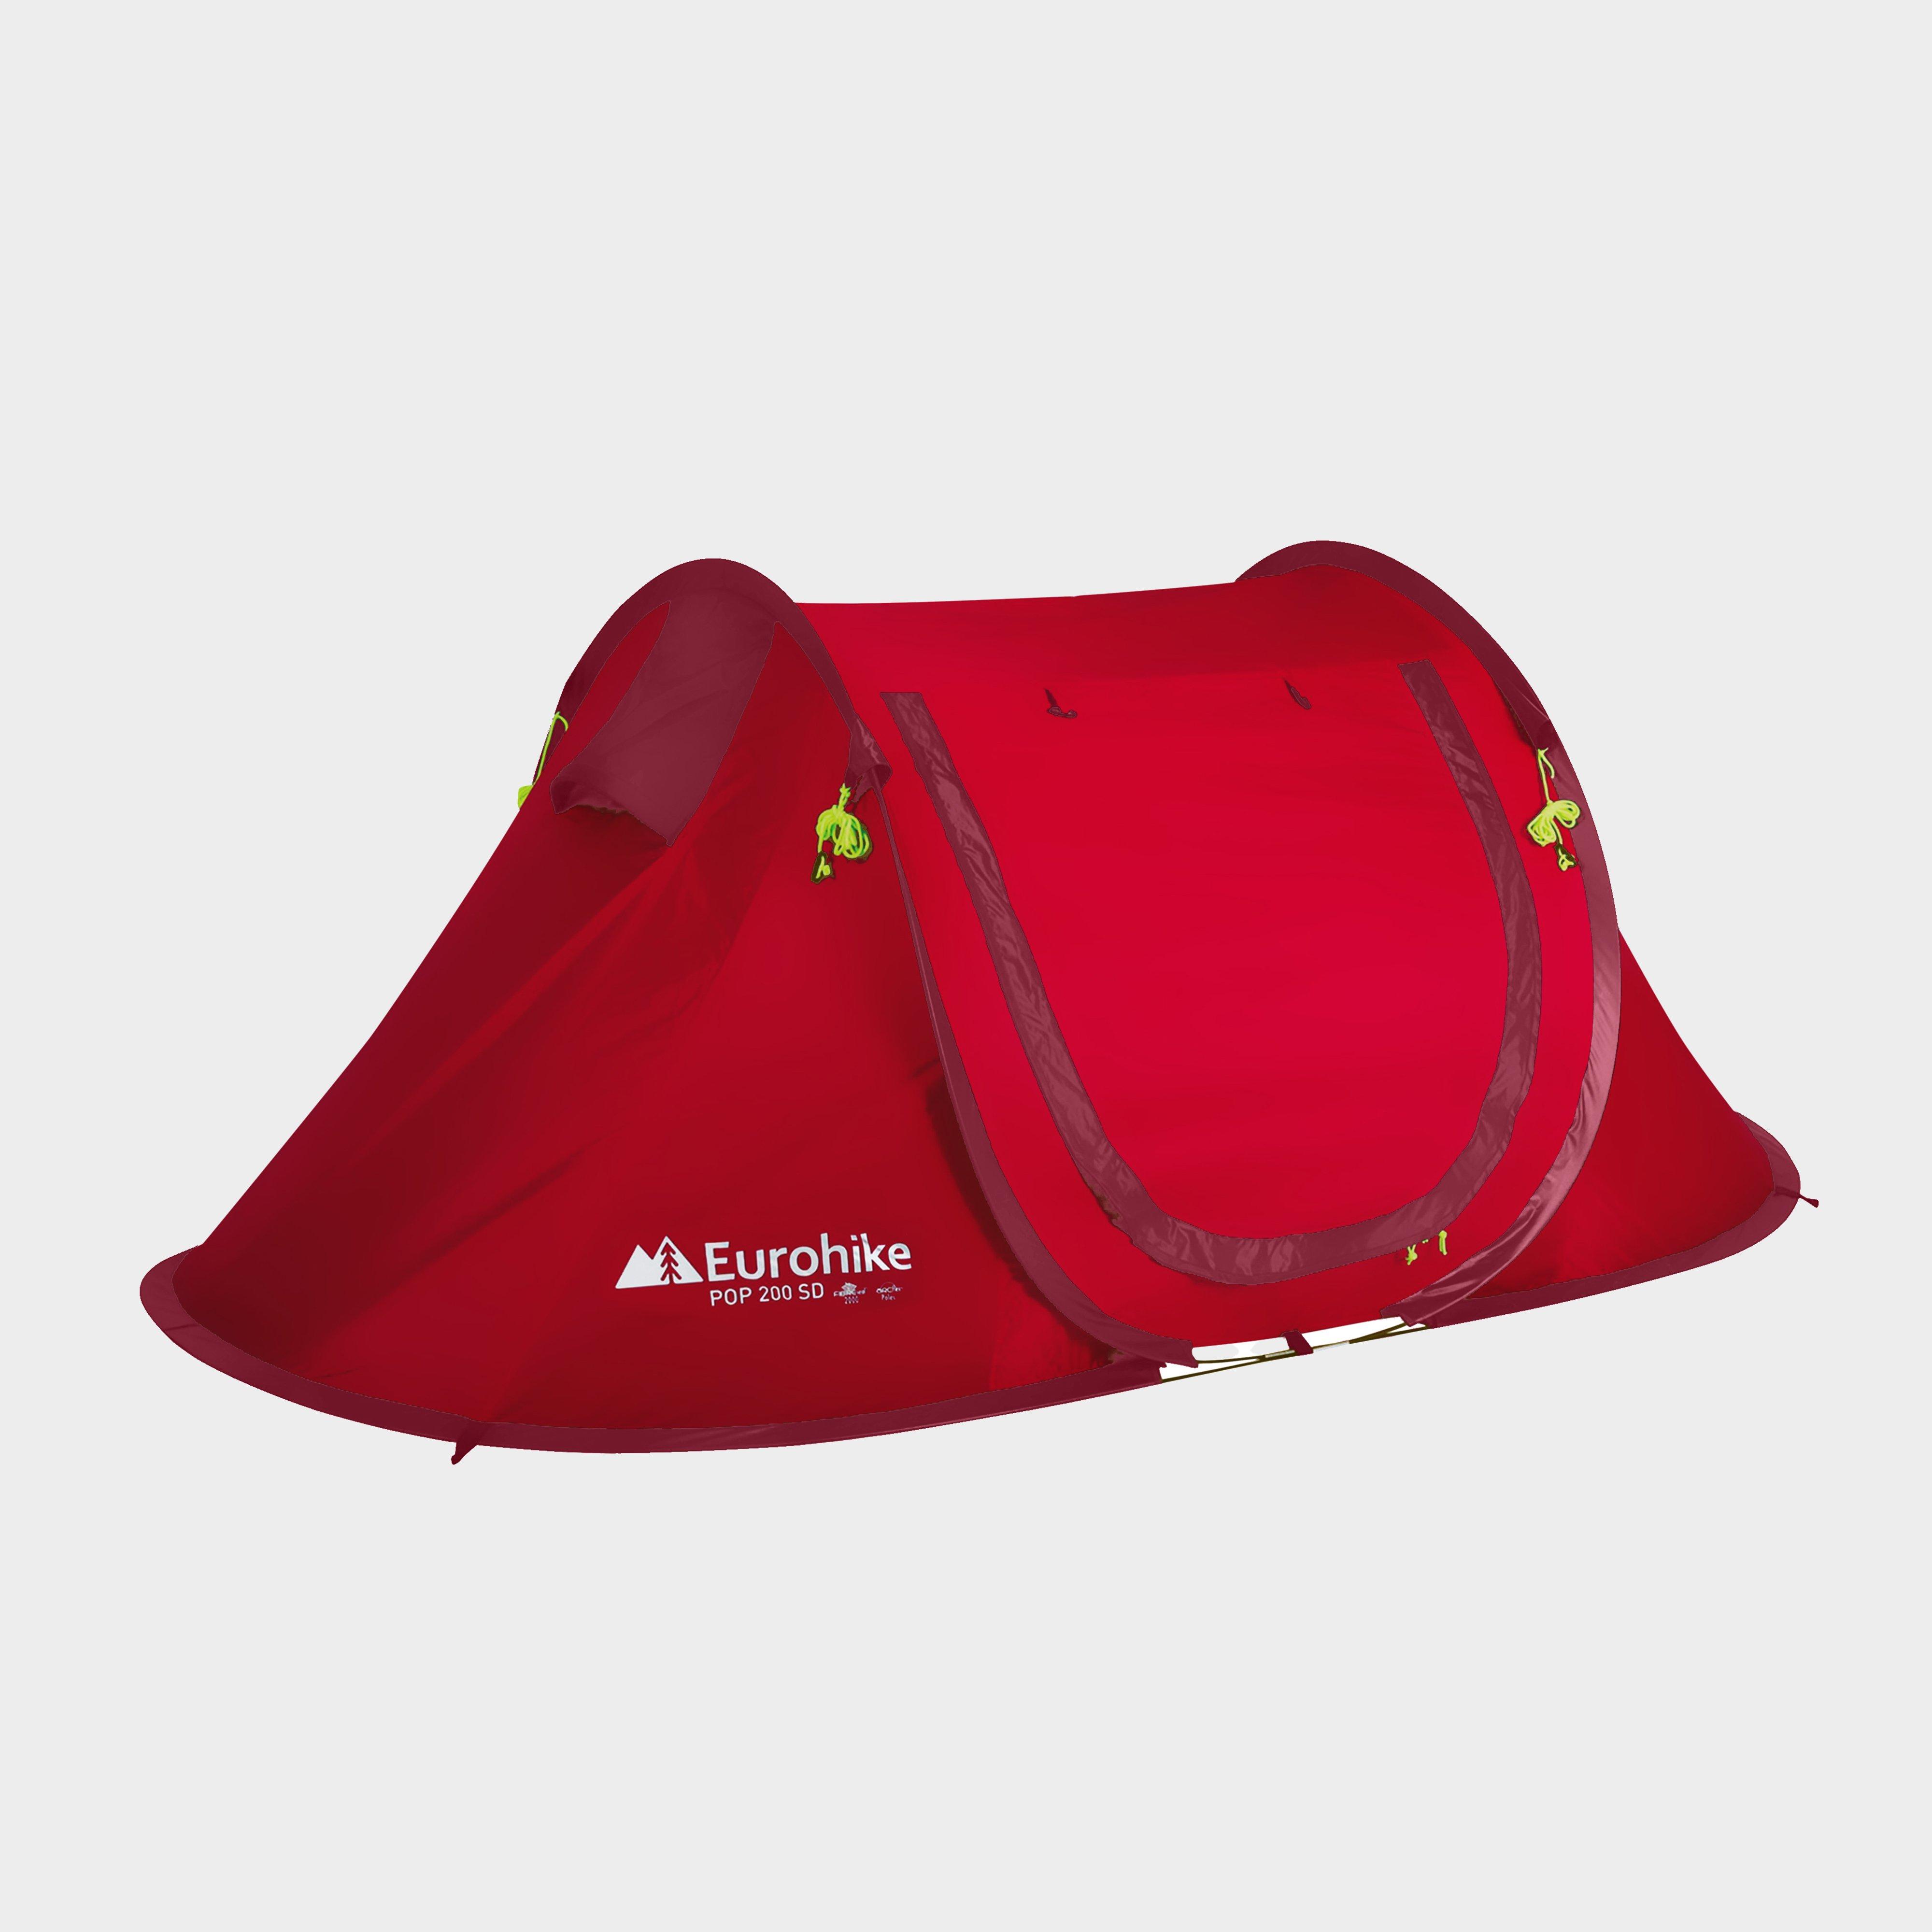 Eurohike Pop 200 2 Person Tent - Red/red  Red/red